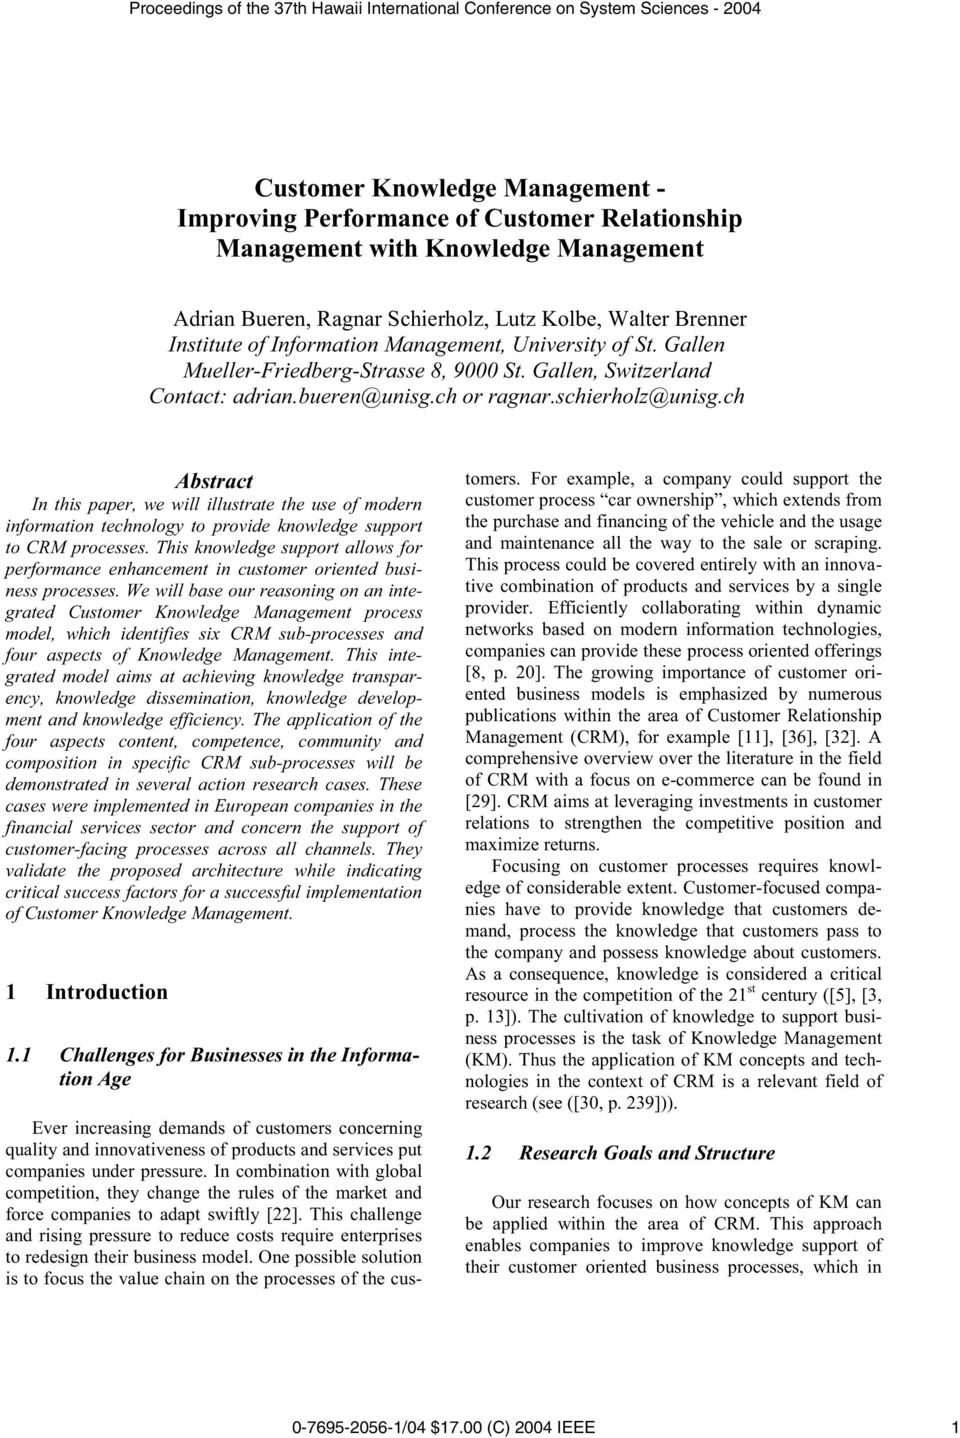 ch Abstract In this paper, we will illustrate the use of modern information technology to provide knowledge support to CRM processes.